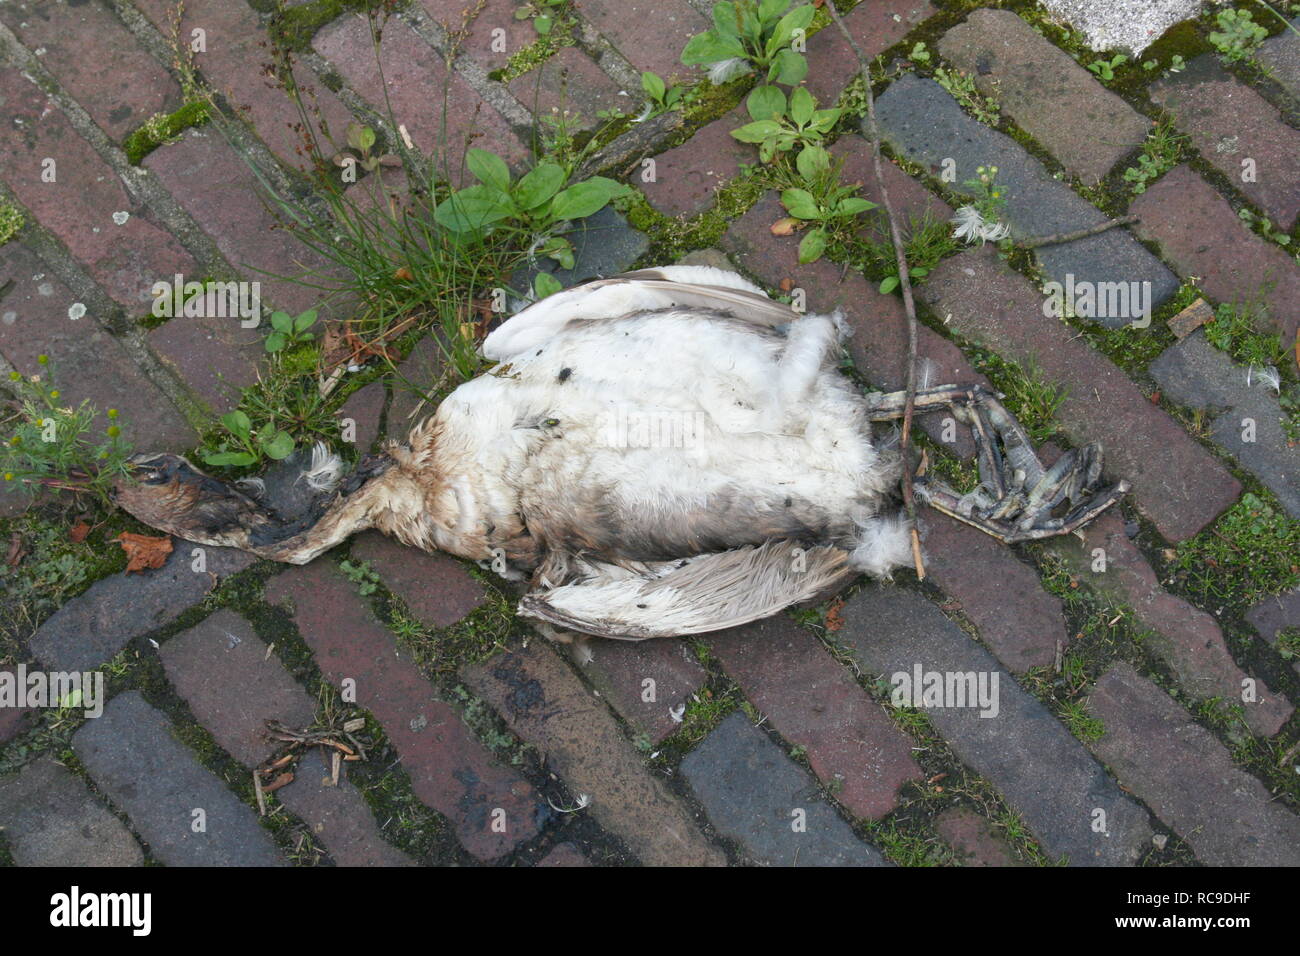 Close-up of the remains of a dead seagull Stock Photo